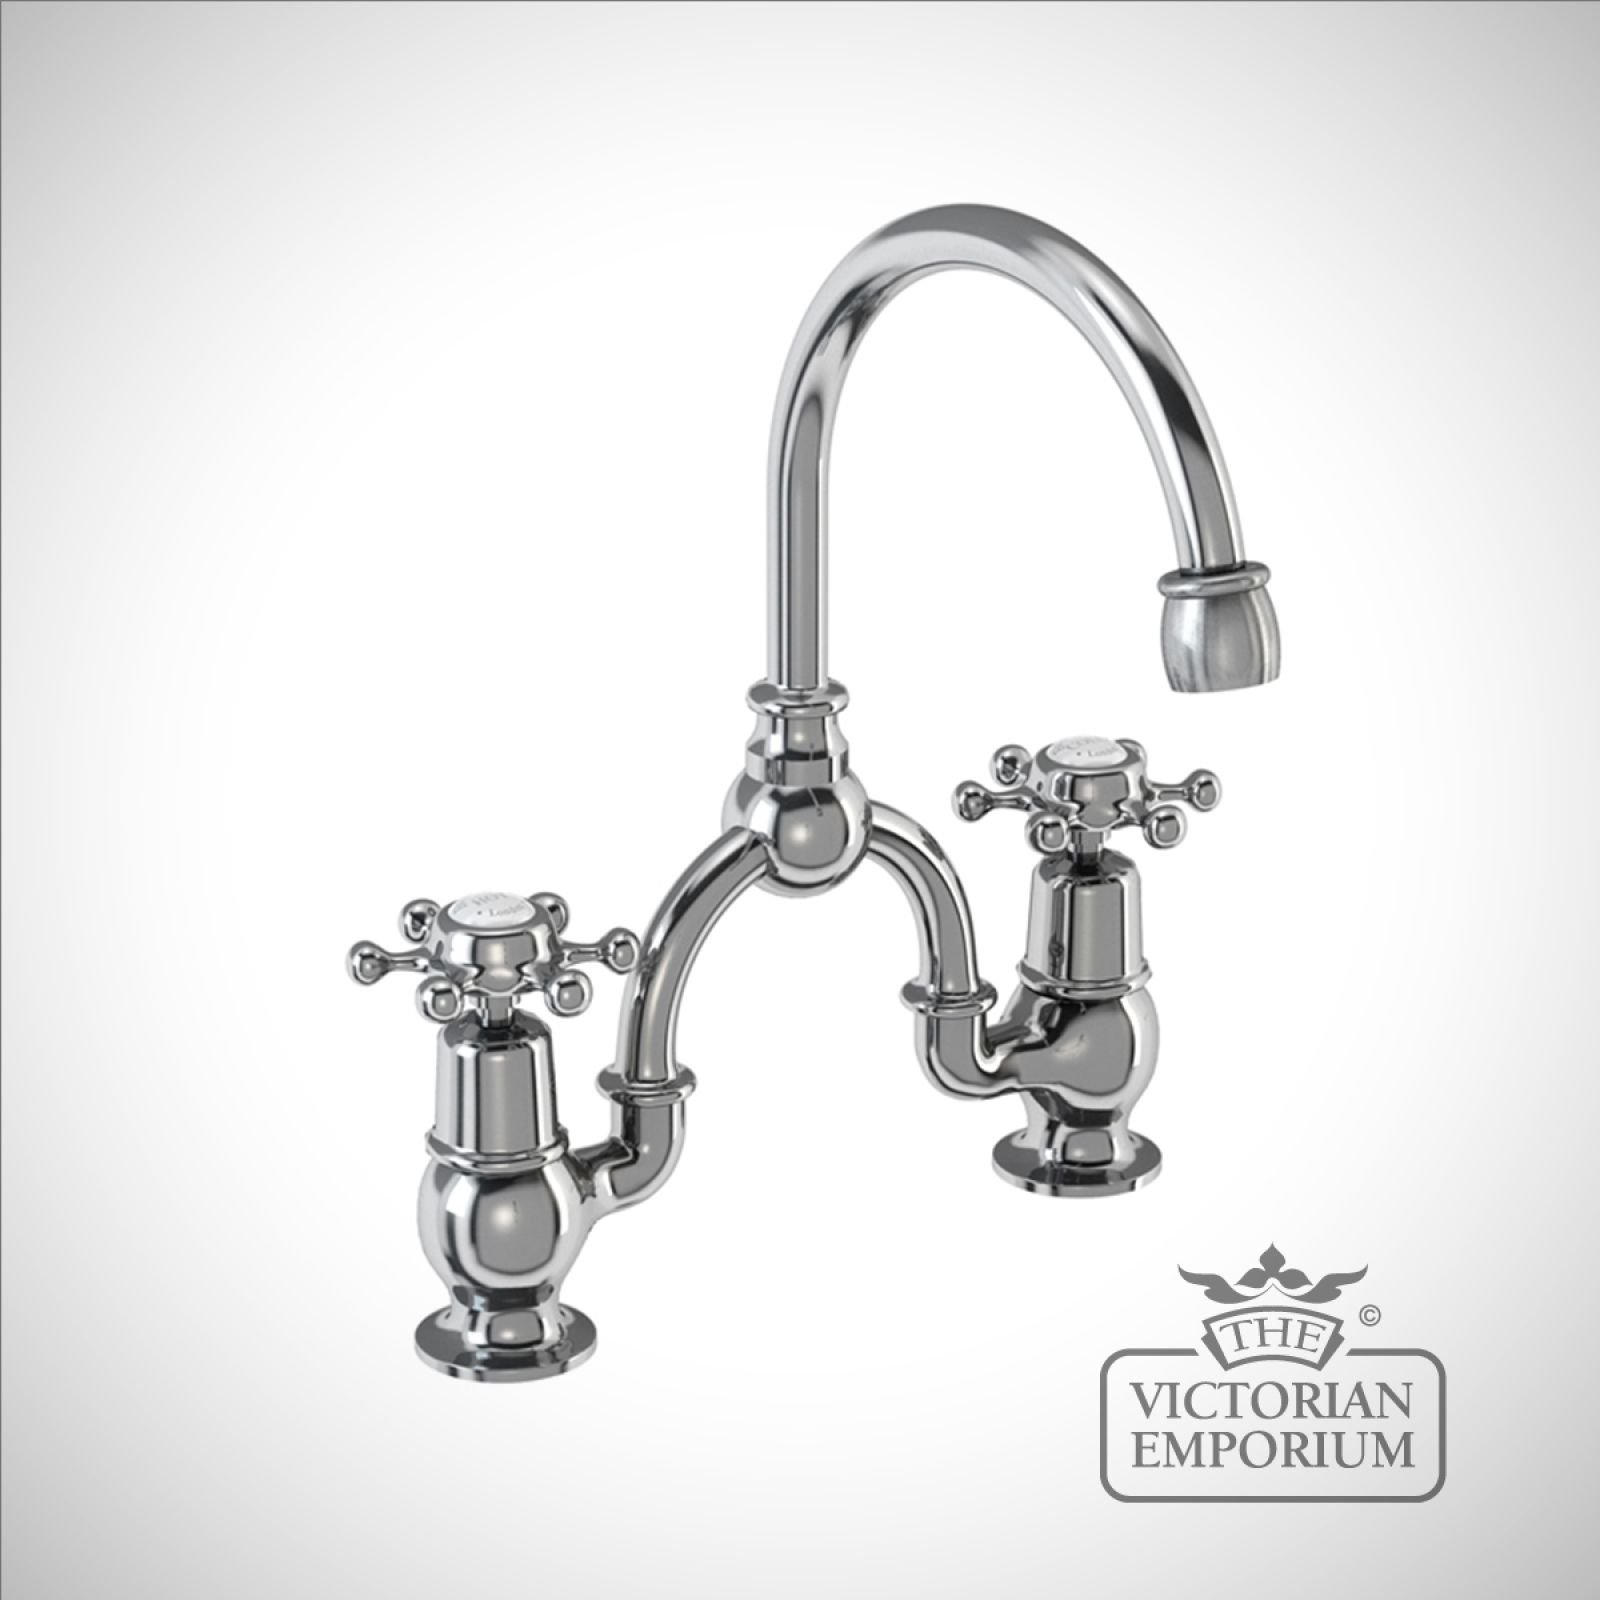 Liverpool 2 tap hole arch mixer with curved spout